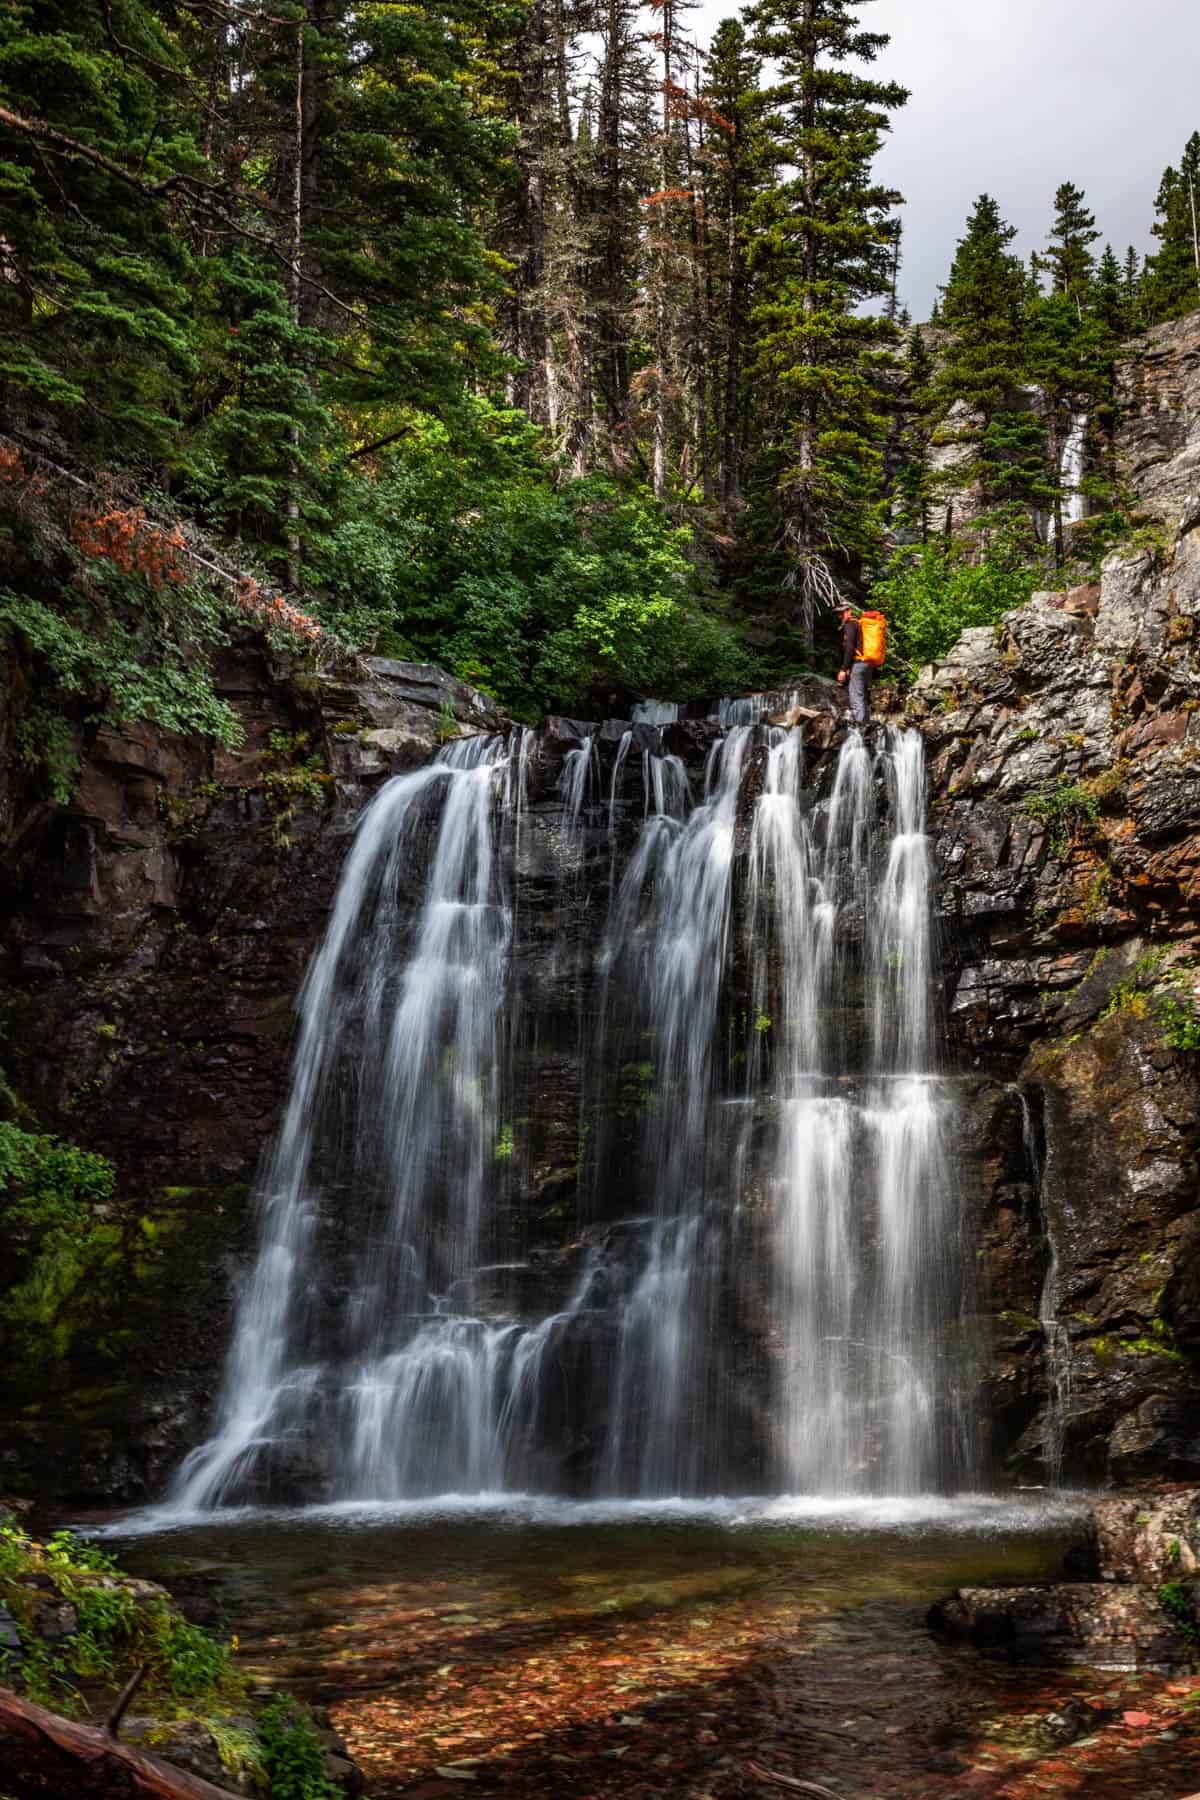 Large waterfall over dark brown rocks with trees around it and a man in an orange backpack standing at the top of the falls.